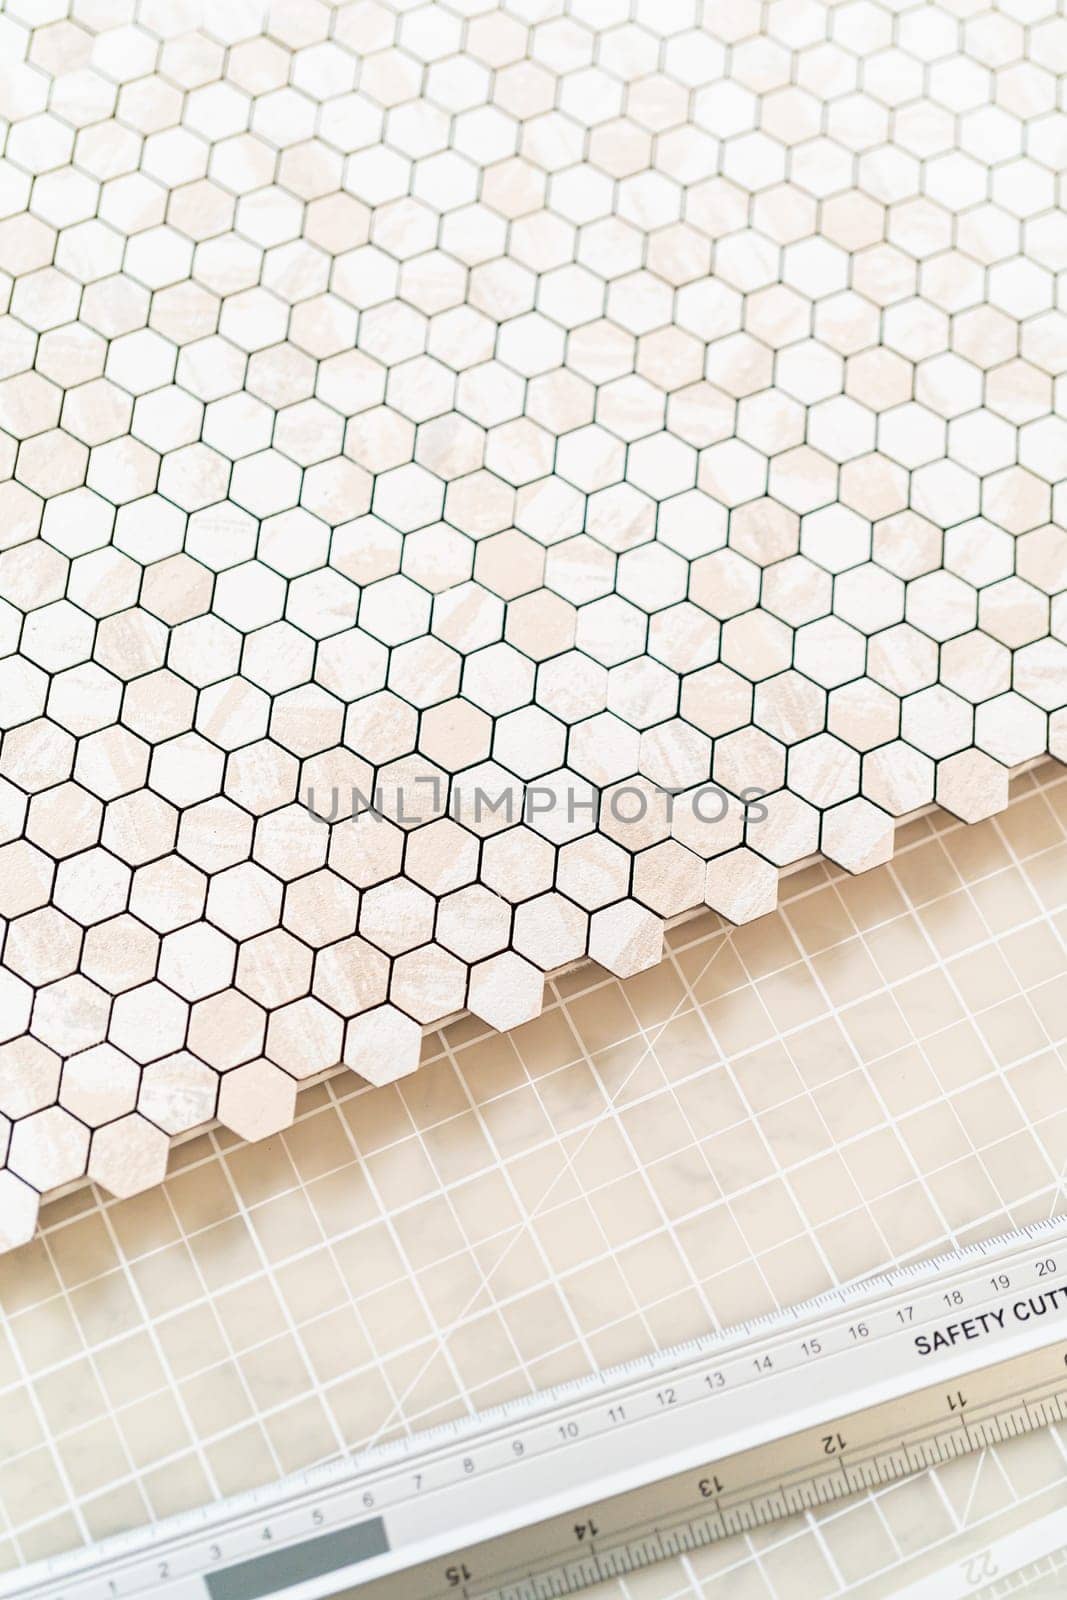 Creating a Stylish Backsplash with Peel and Stick Tiles by arinahabich